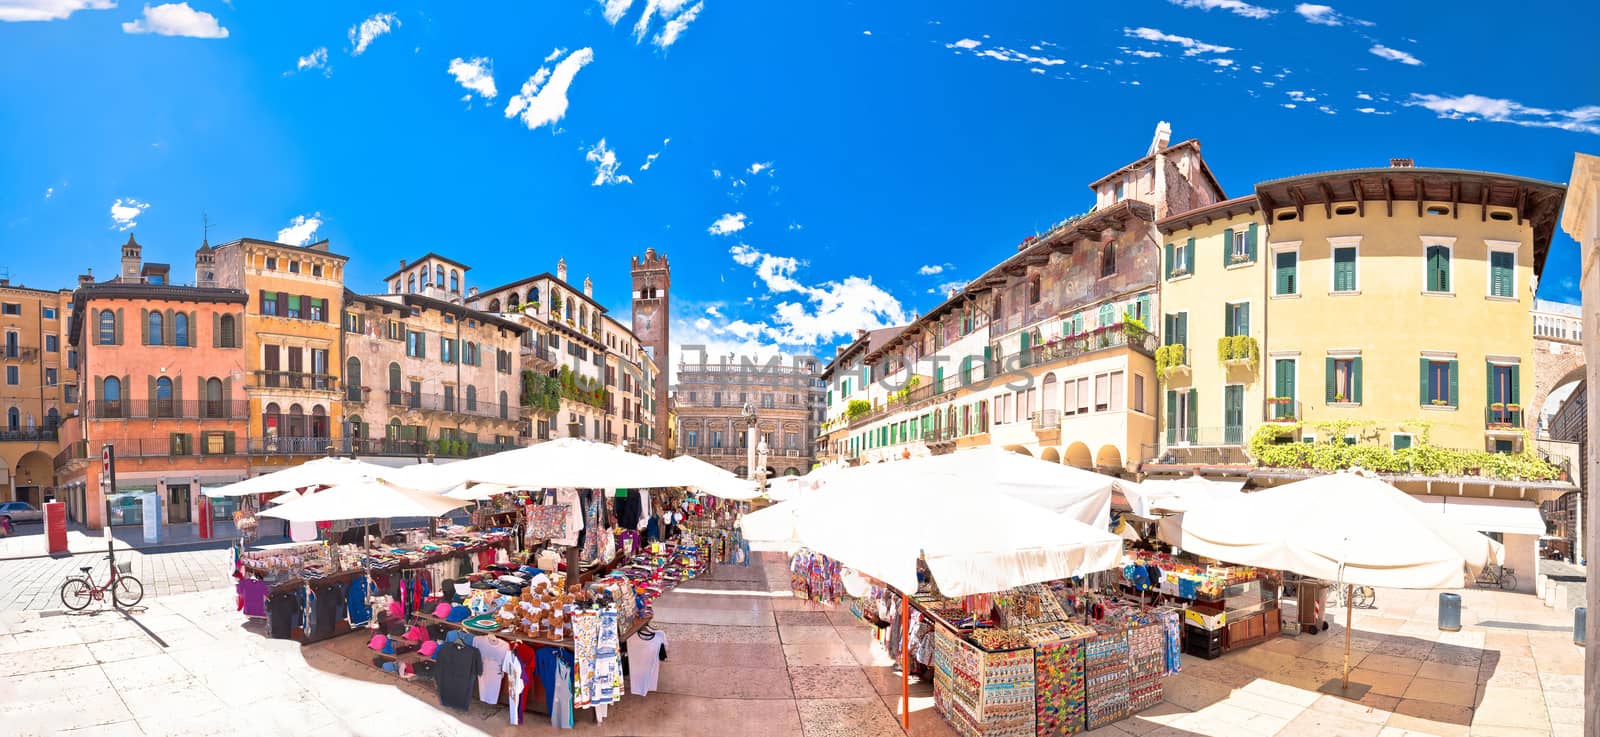 Piazza delle erbe in Verona street and market panoramic view by xbrchx